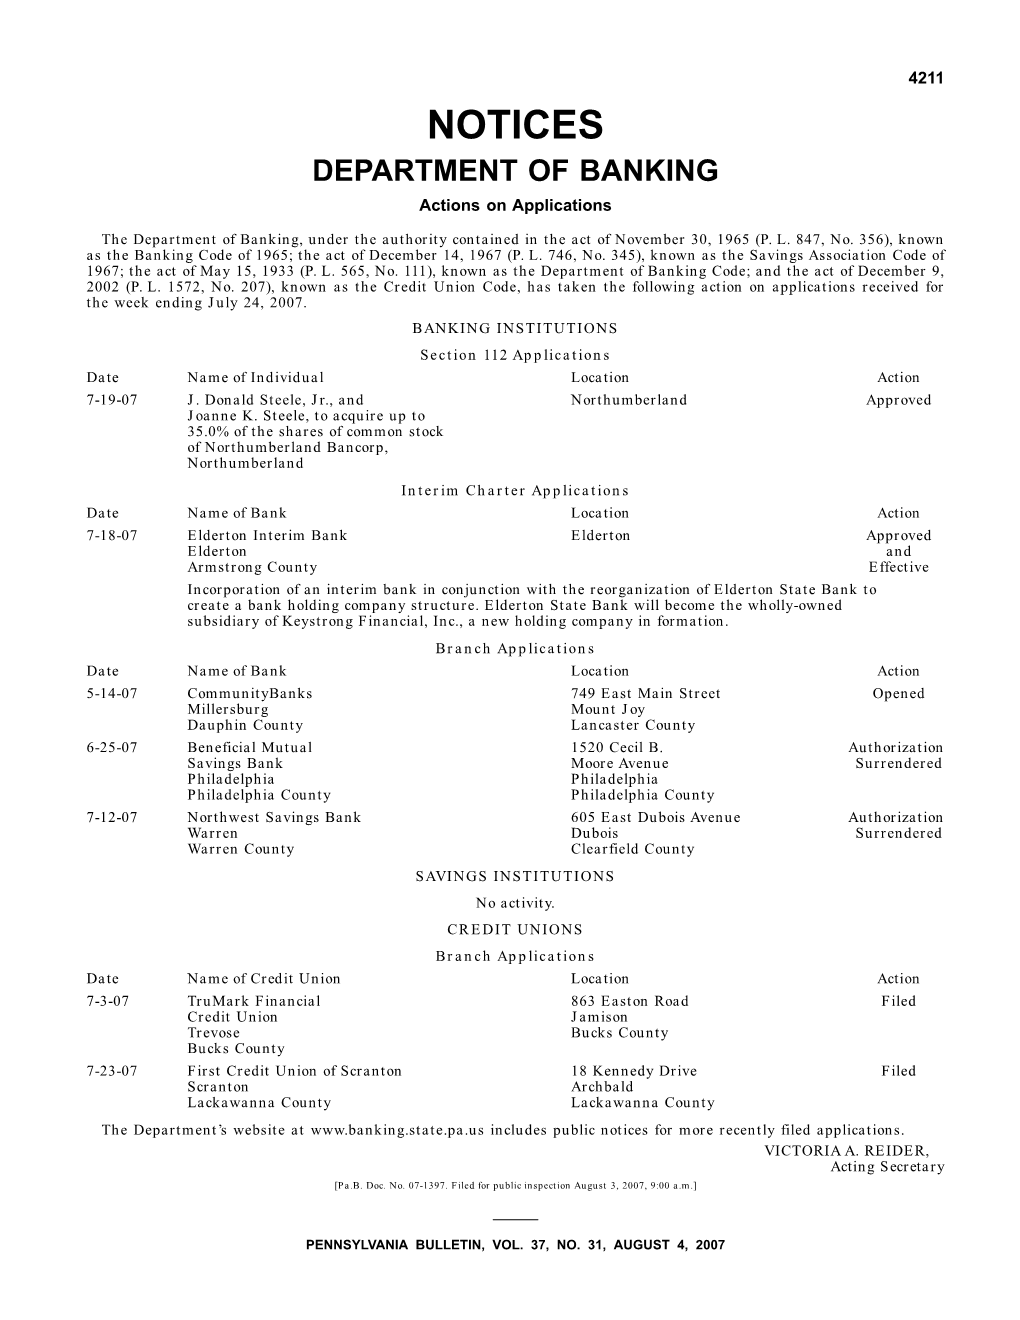 NOTICES DEPARTMENT of BANKING Actions on Applications